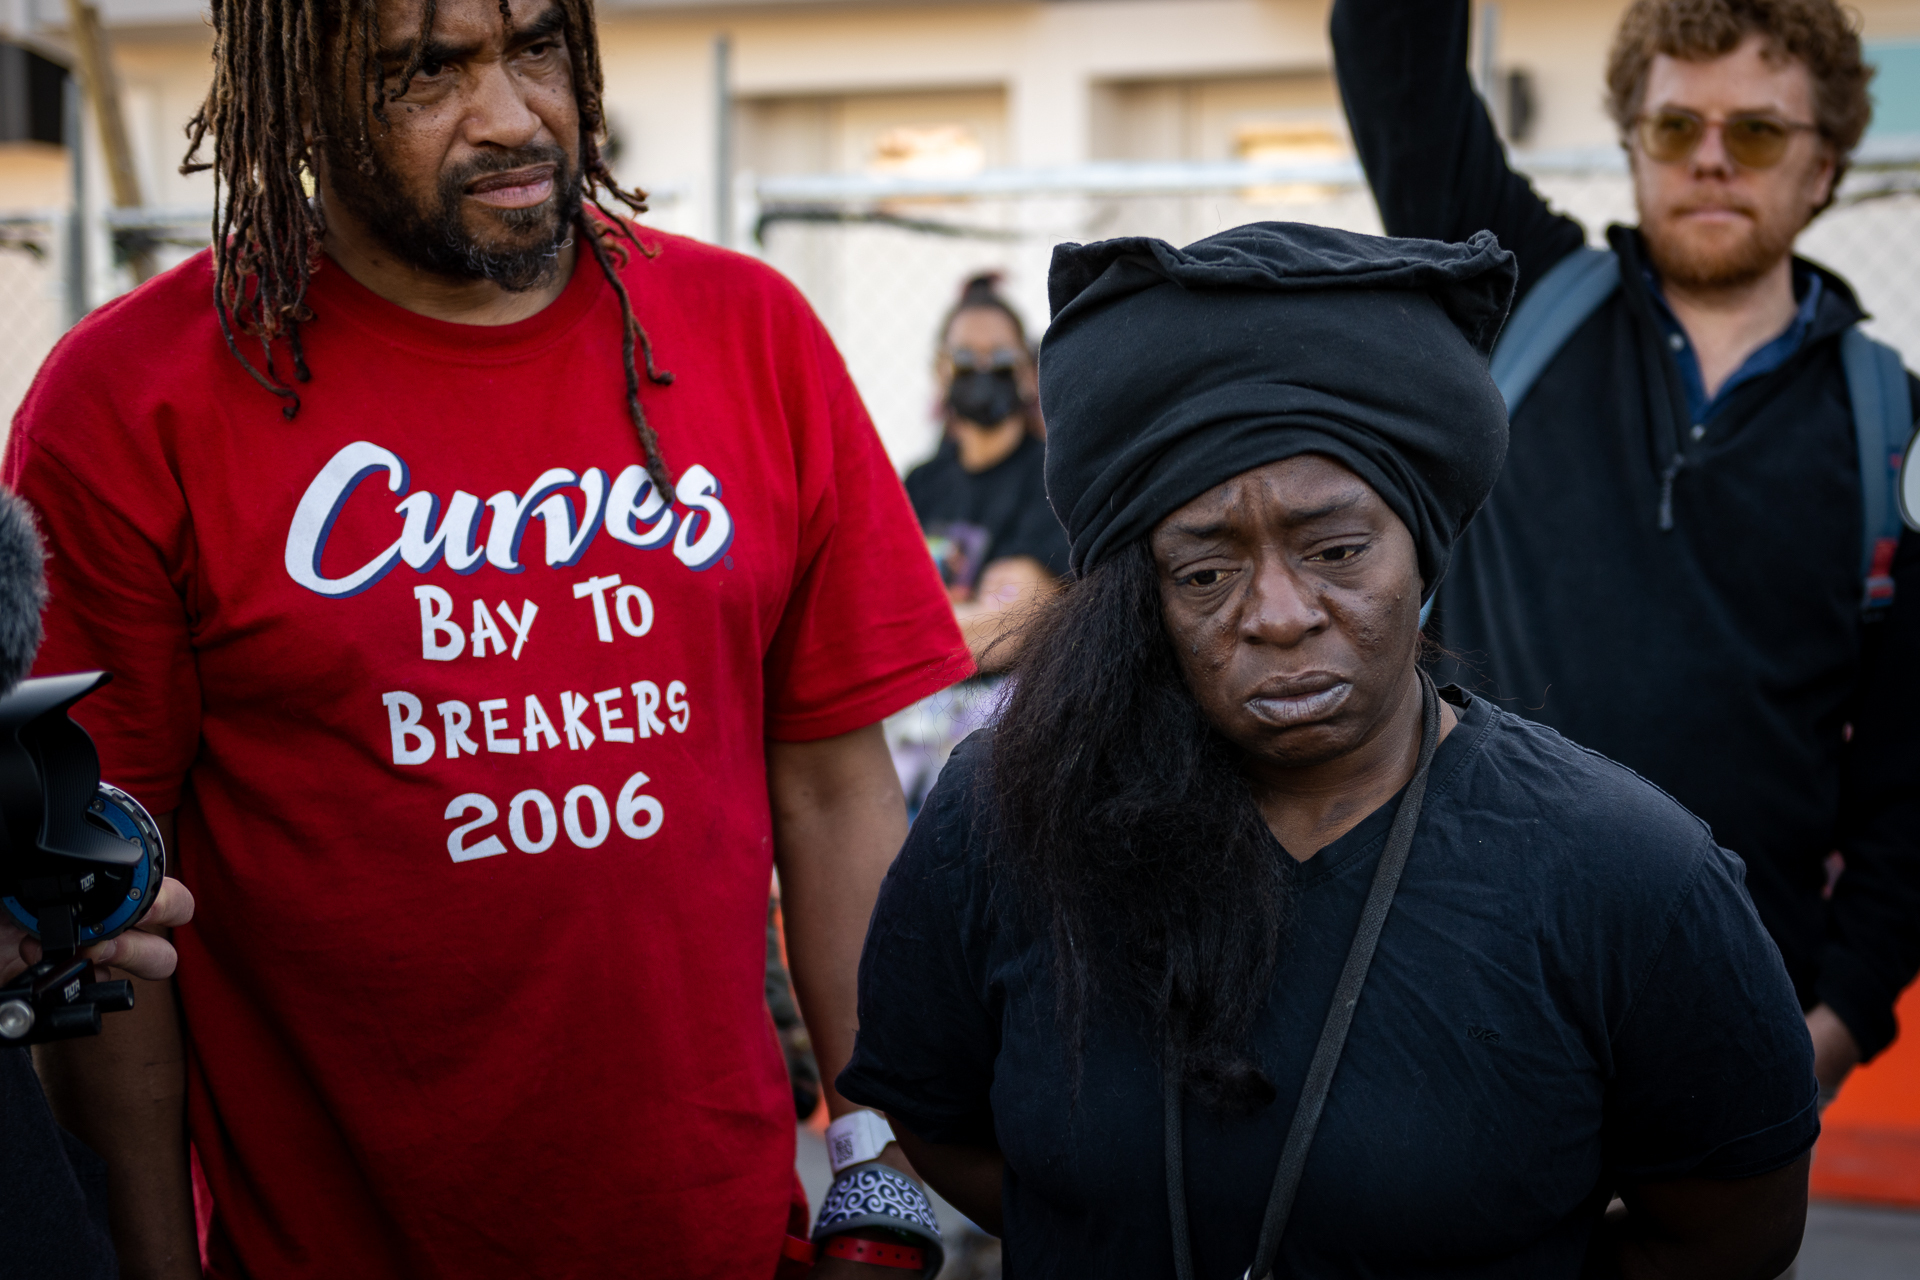 A Black woman with a black headdress and T-shirt looks heartbroken as she stares downward. Two men, one Black and one white-presenting, are pictured behind her.